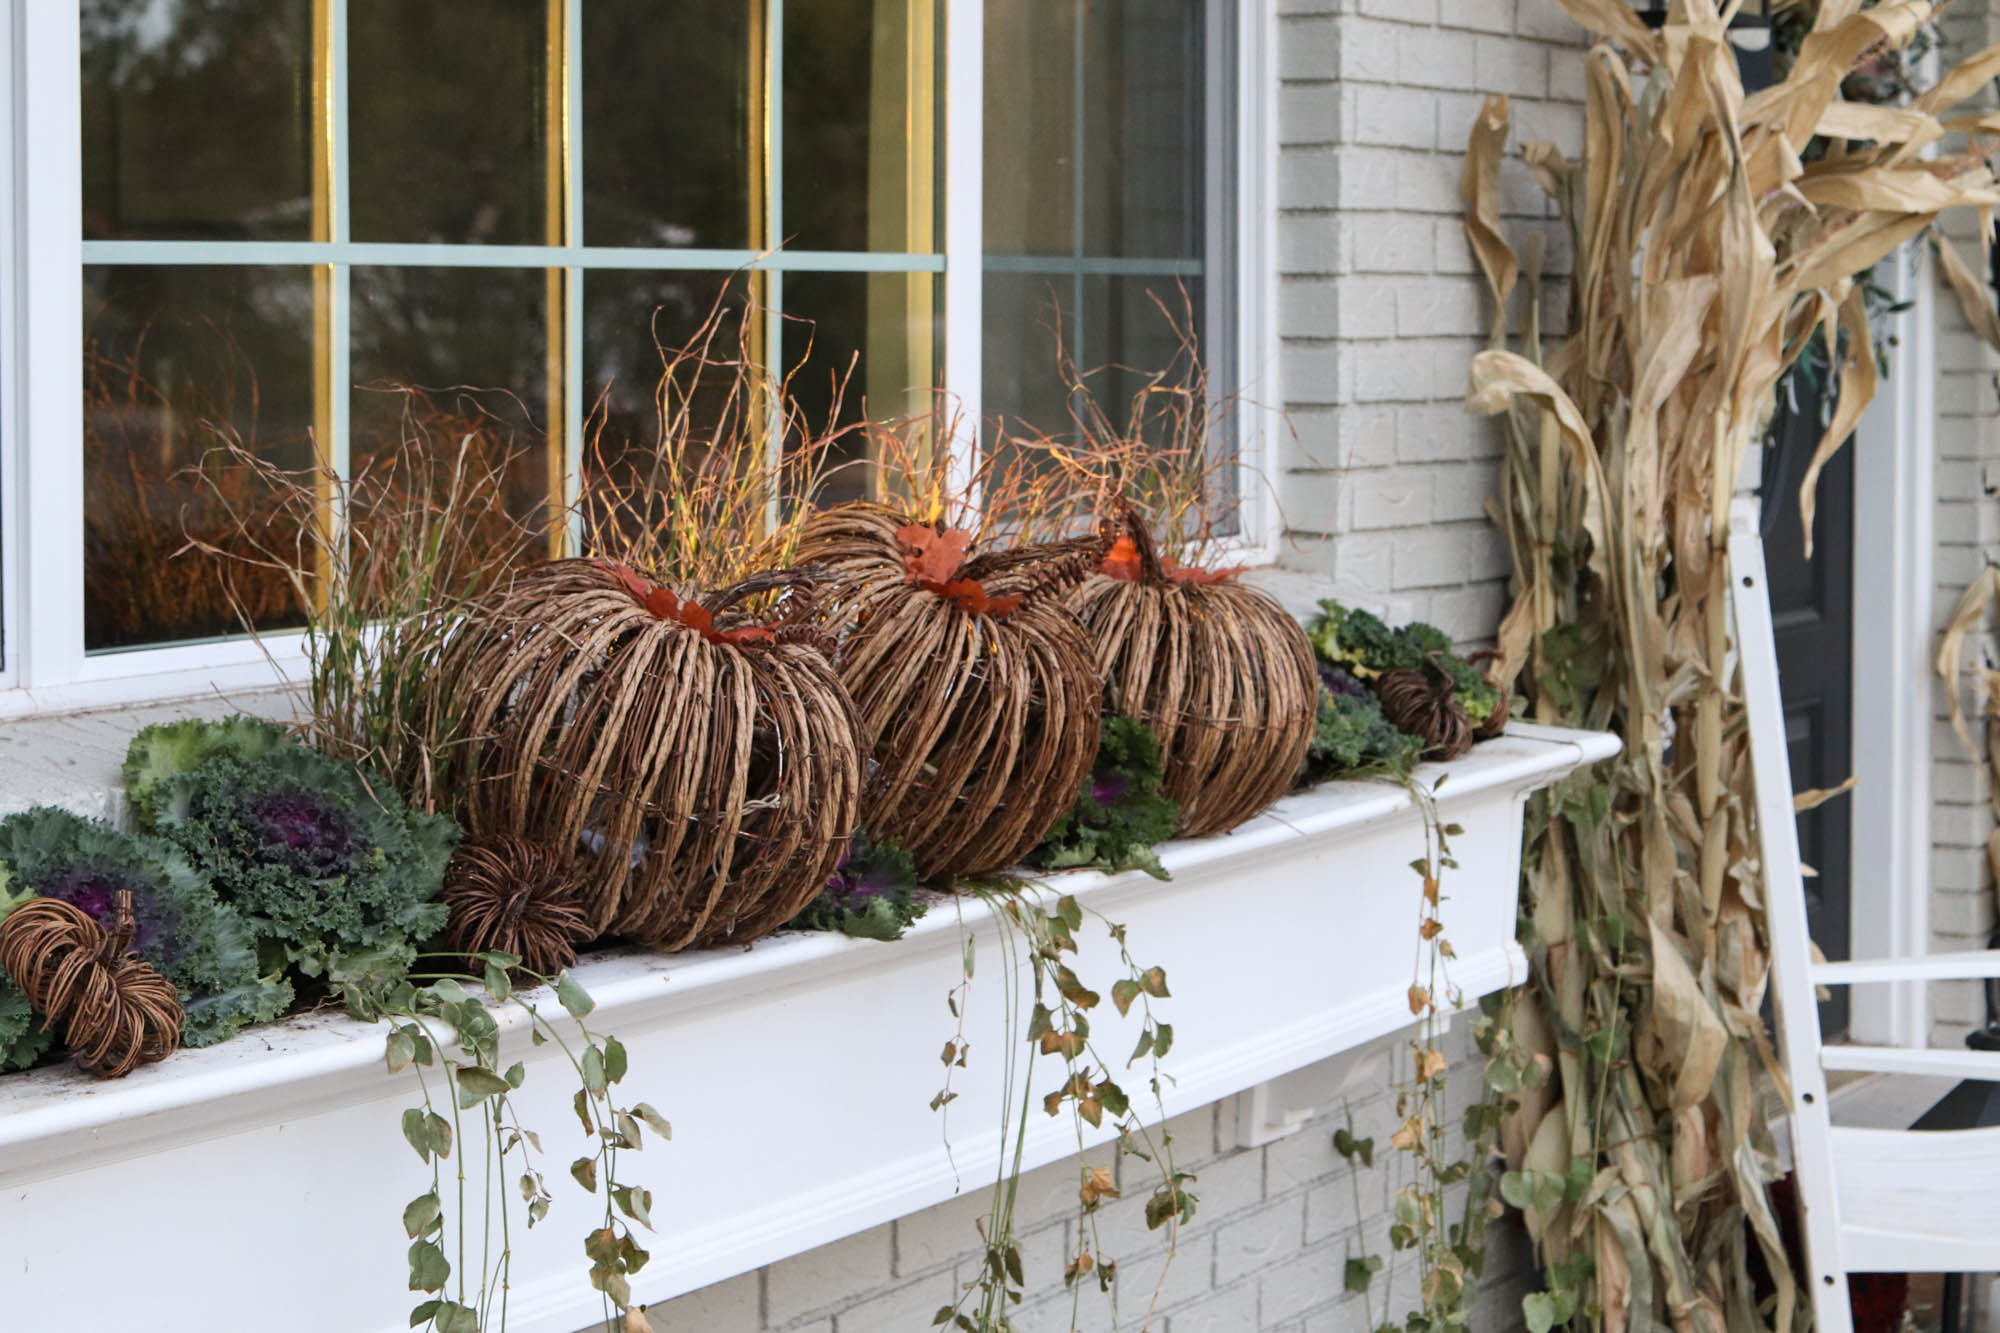 A picture of wicker pumpkins and flowering kale in a white window box.